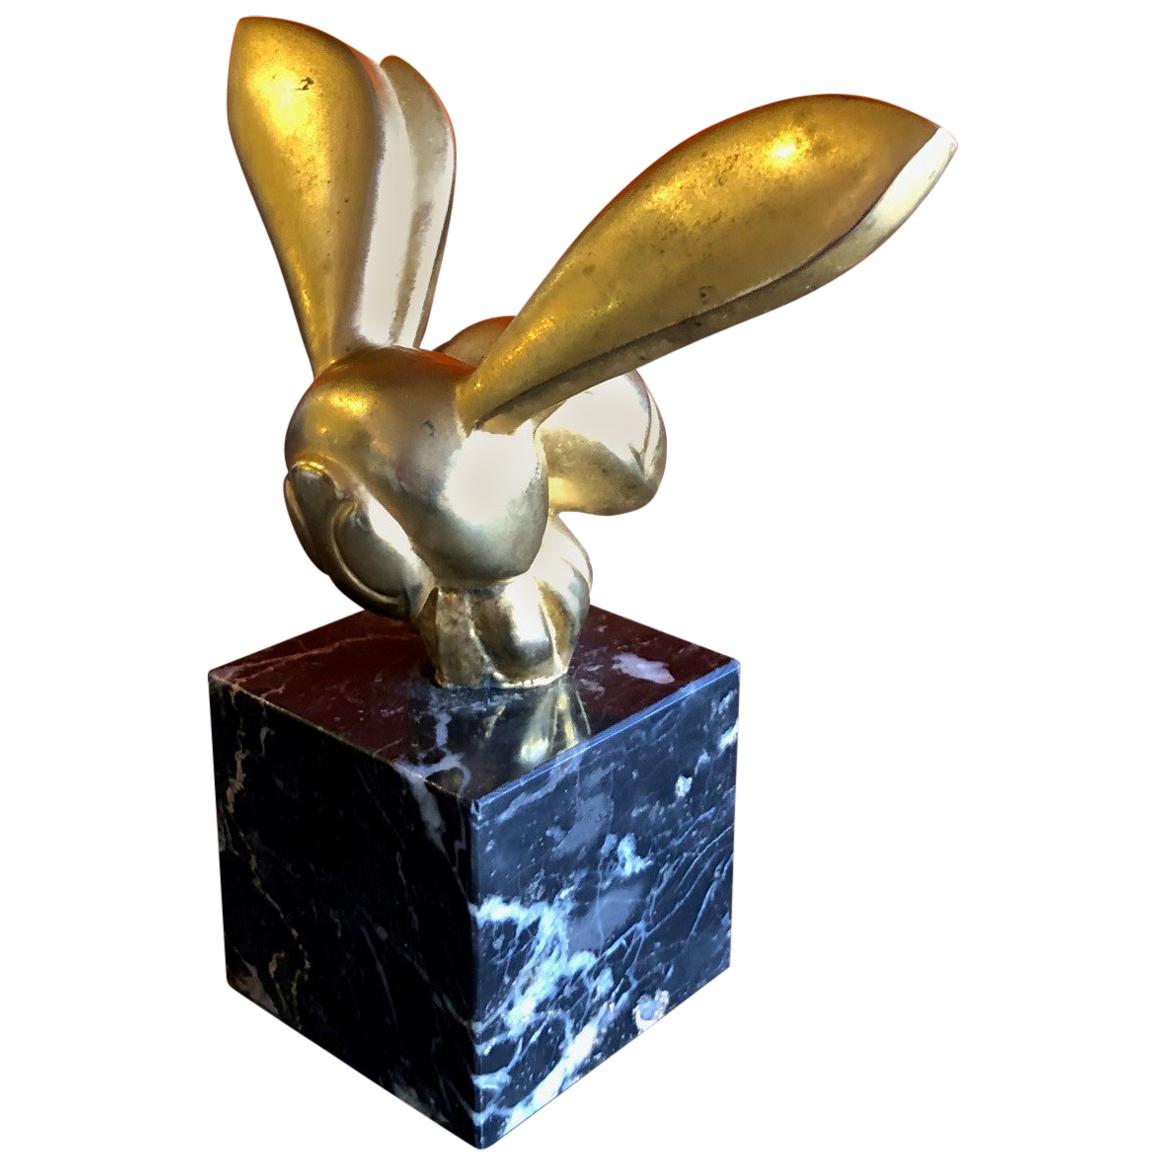 Small Brass "Bee" Sculpture on Marble Base by Gaston Lachaise Philadelphia MOA